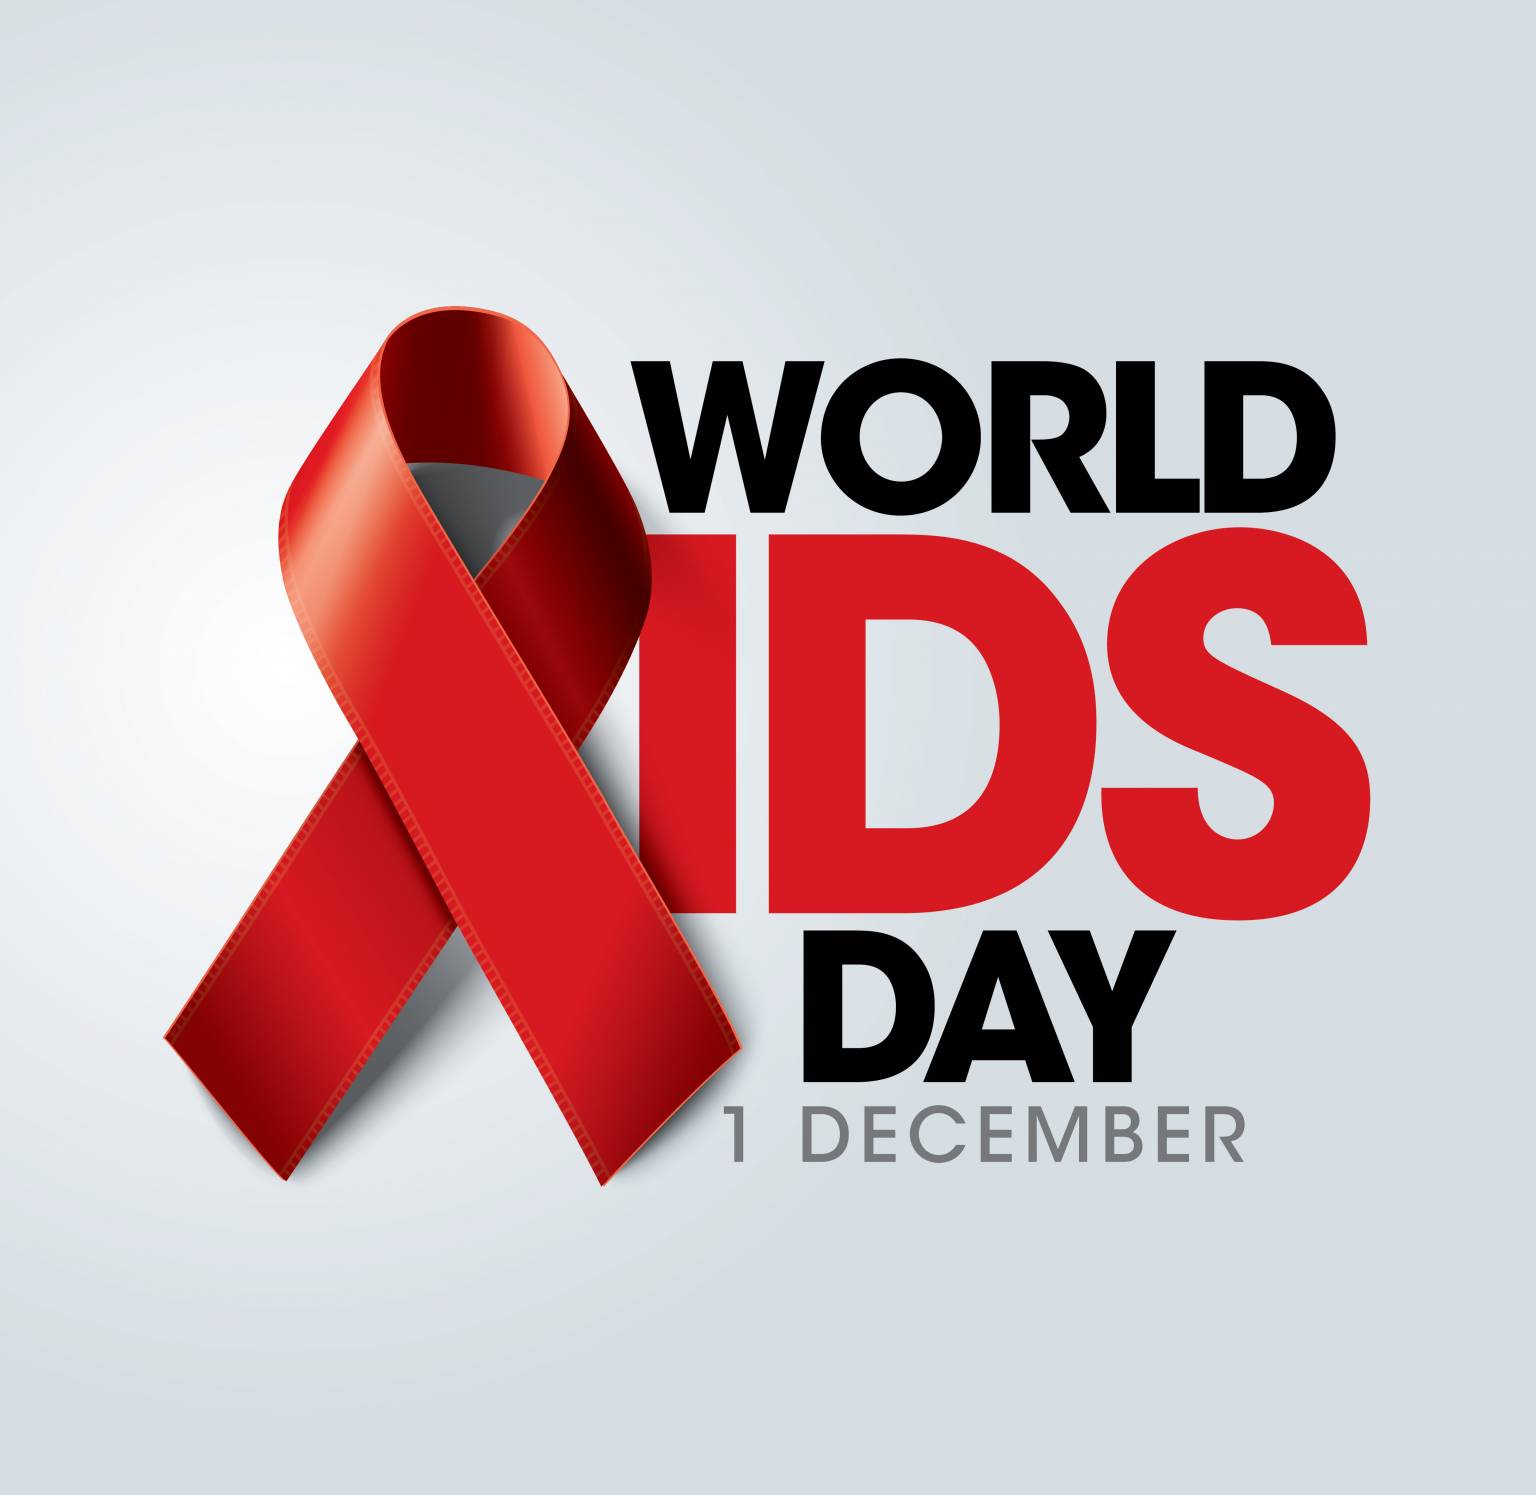 World AIDs Day: Youth urged to use condoms to stop spread of HIV/AIDs